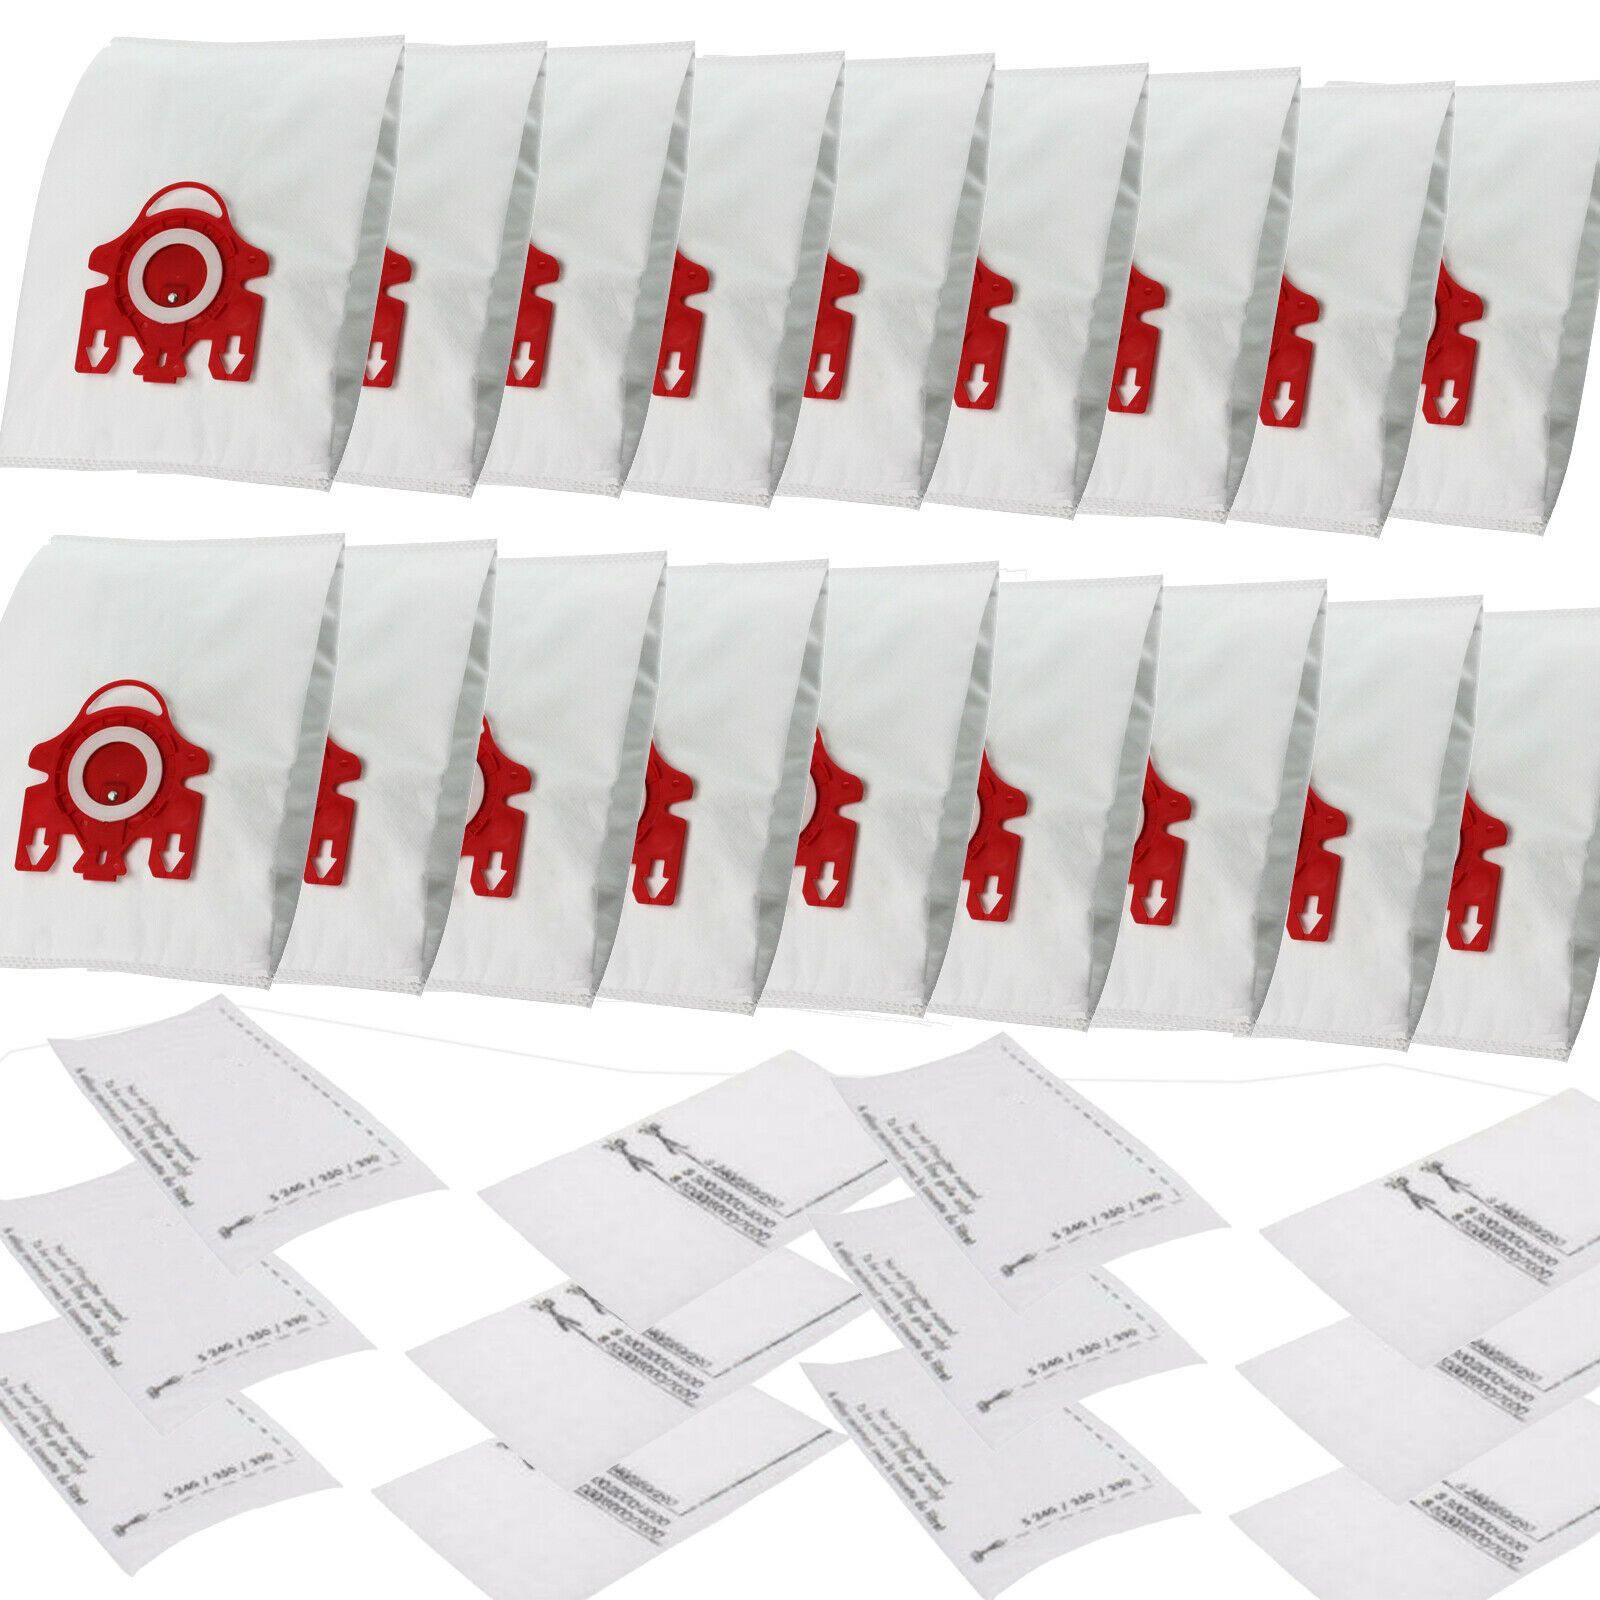 18 Vacuum Dust Bags & 12 Filters For Miele S251i-1 S255 S255i S256 S291 S291-2 Sparesbarn